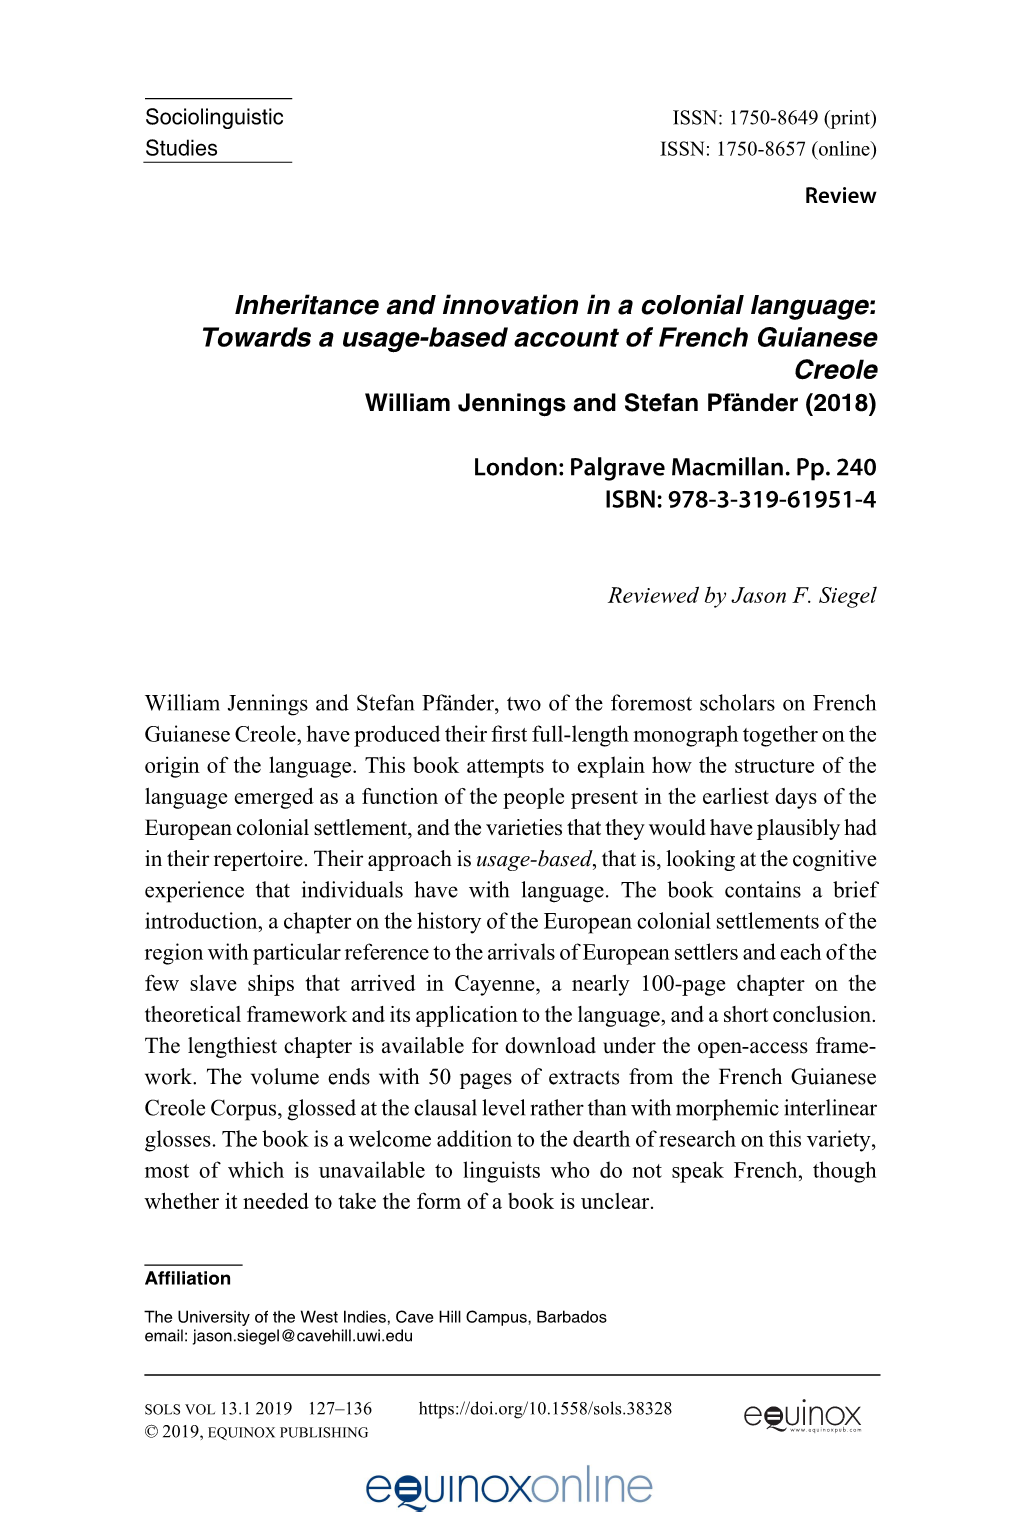 Inheritance and Innovation in a Colonial Language: Towards a Usage-Based Account of French Guianese Creole William Jennings and Stefan Pfänder (2018)